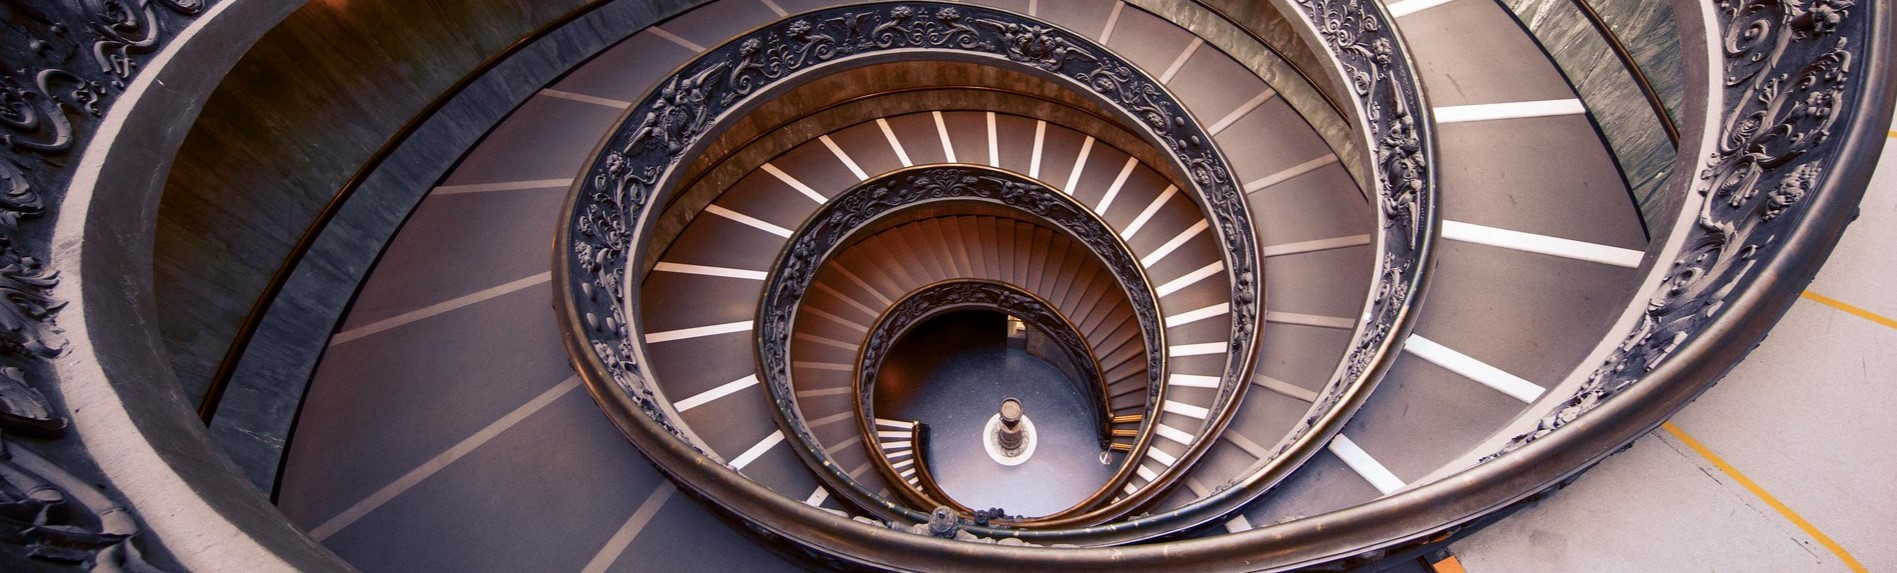 Why was the Bramante Staircase Built?